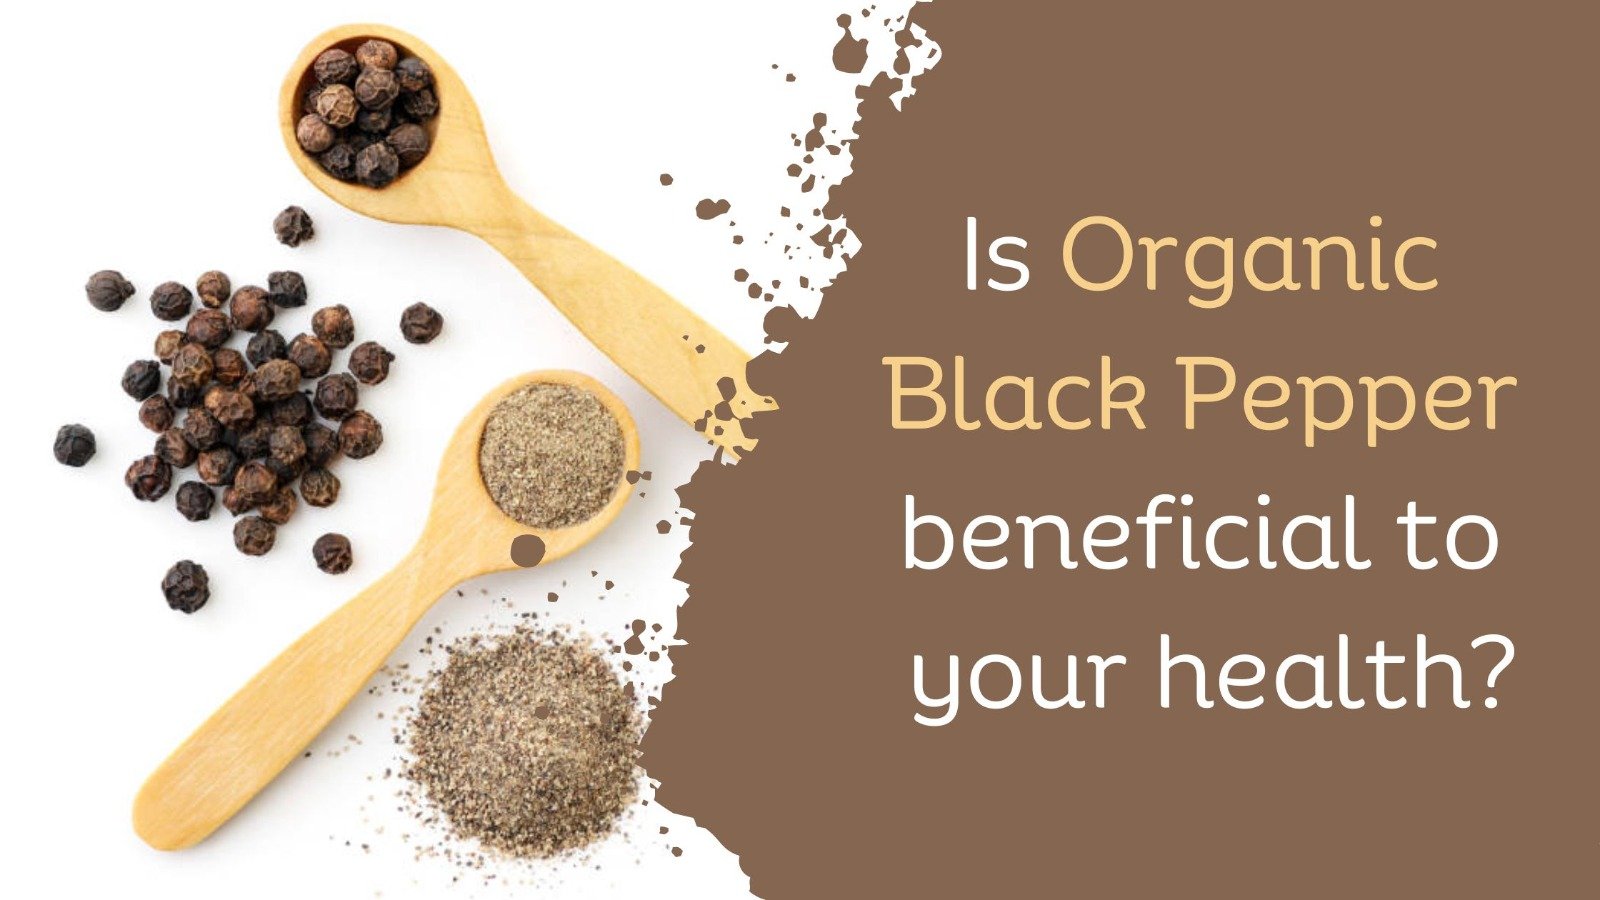 Is organic black pepper beneficial to your health?